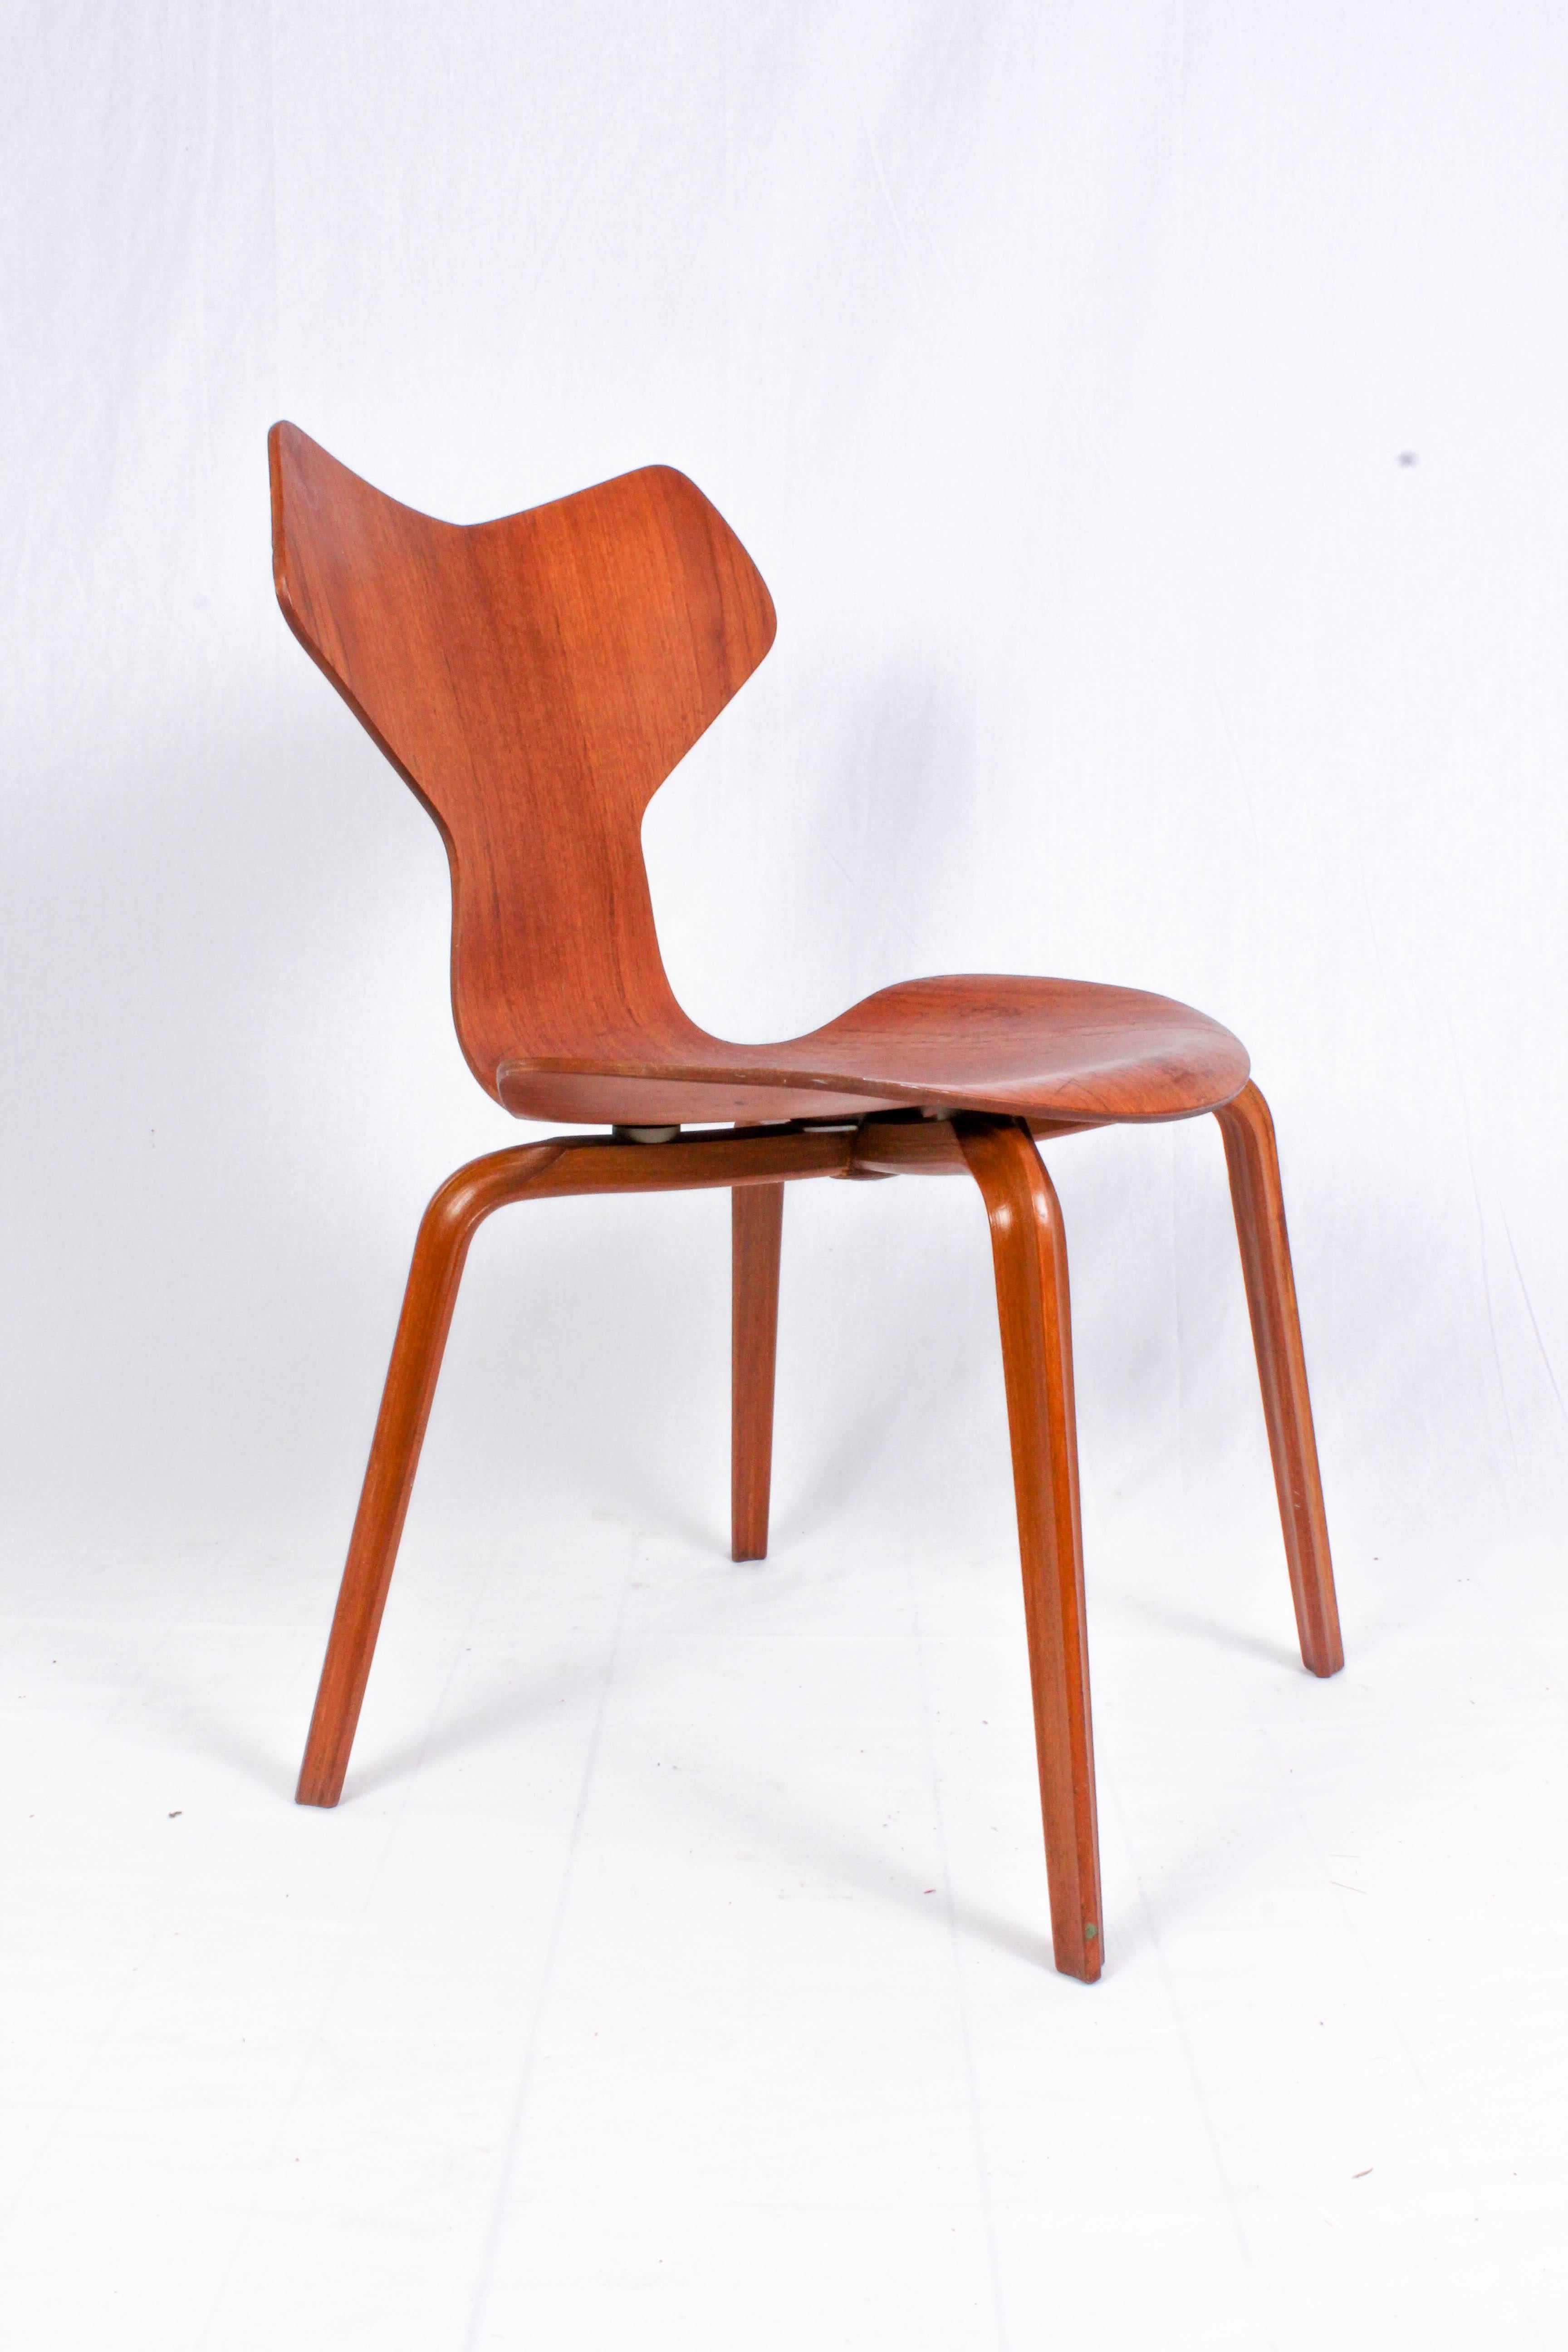 This iconic design Classic was designed by Arne Jacobsen in 1957 and this piece was produced by Fritz Hansen in 1964. The chair is made out of teak and is in good vintage condition with signs of usage consistent with age. 
The model 3130 chair, or